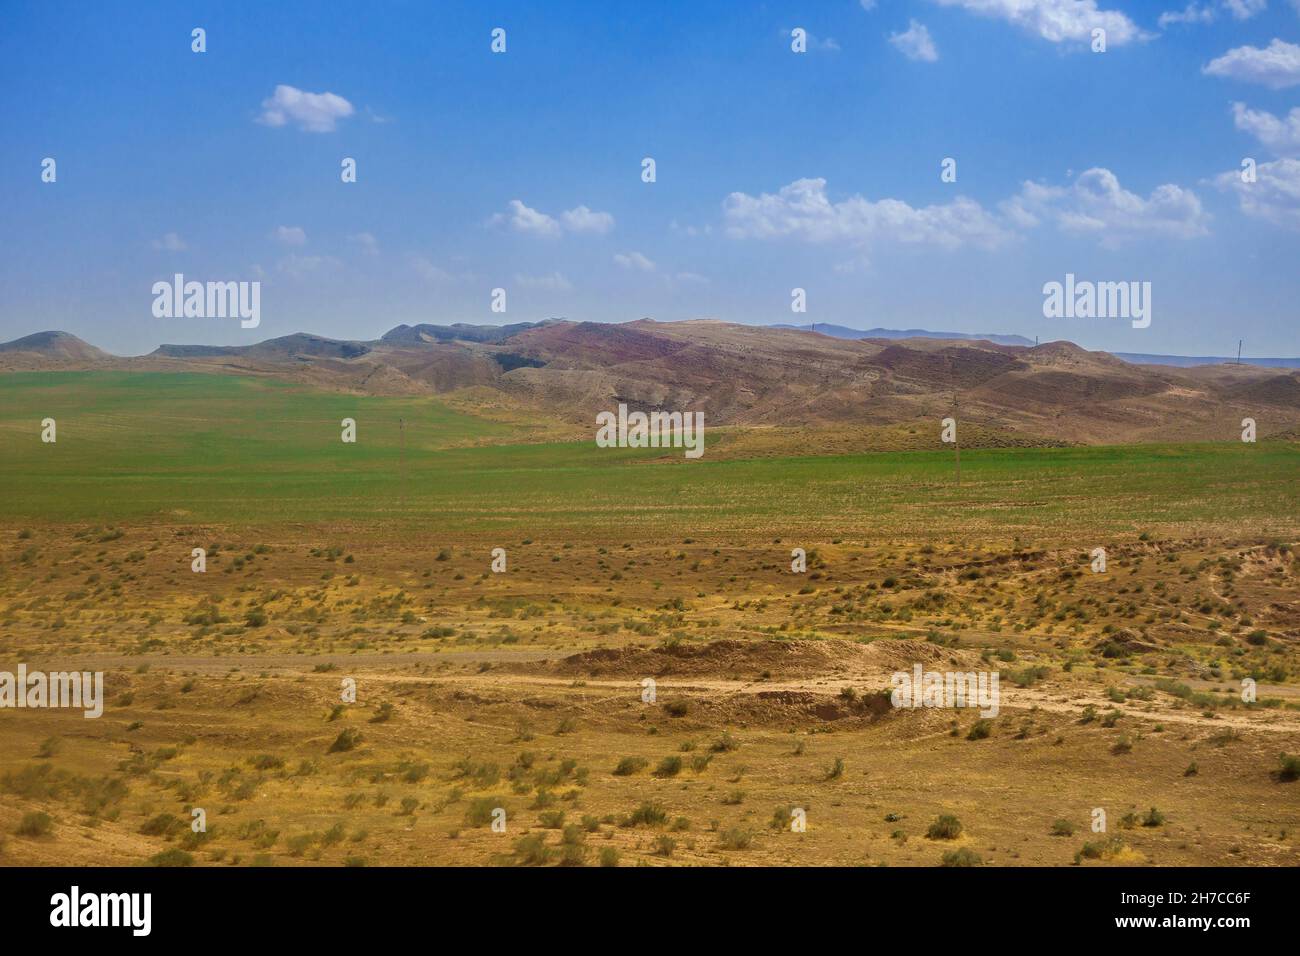 Deserted steppe, giving way to green pasture at the foot of the Gissar ridge. Shot in the Surkhandarya region of southern Uzbekistan Stock Photo